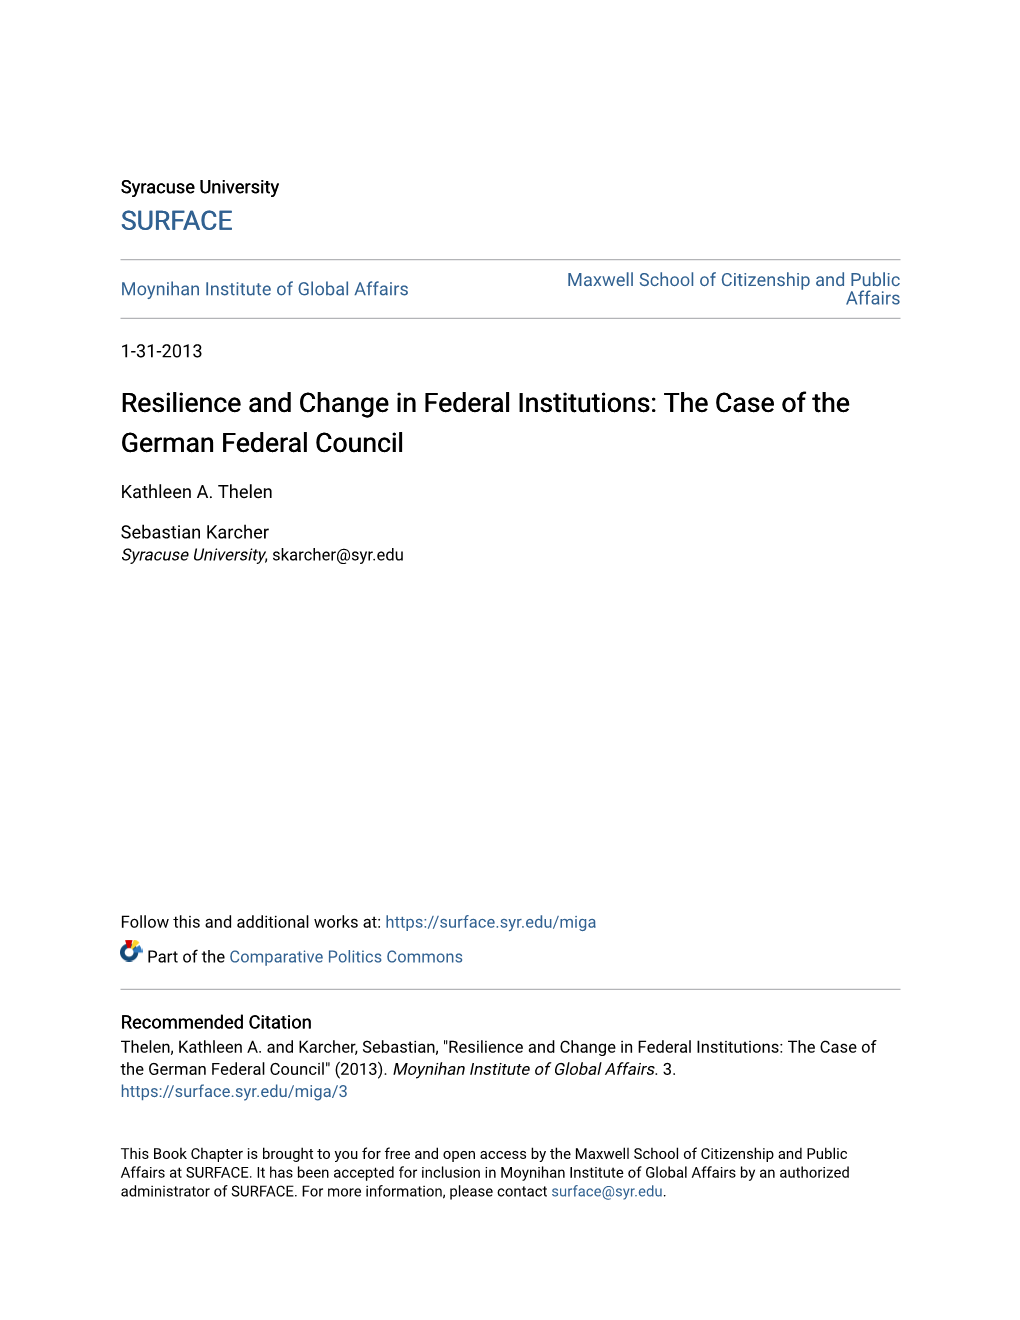 Resilience and Change in Federal Institutions: the Case of the German Federal Council